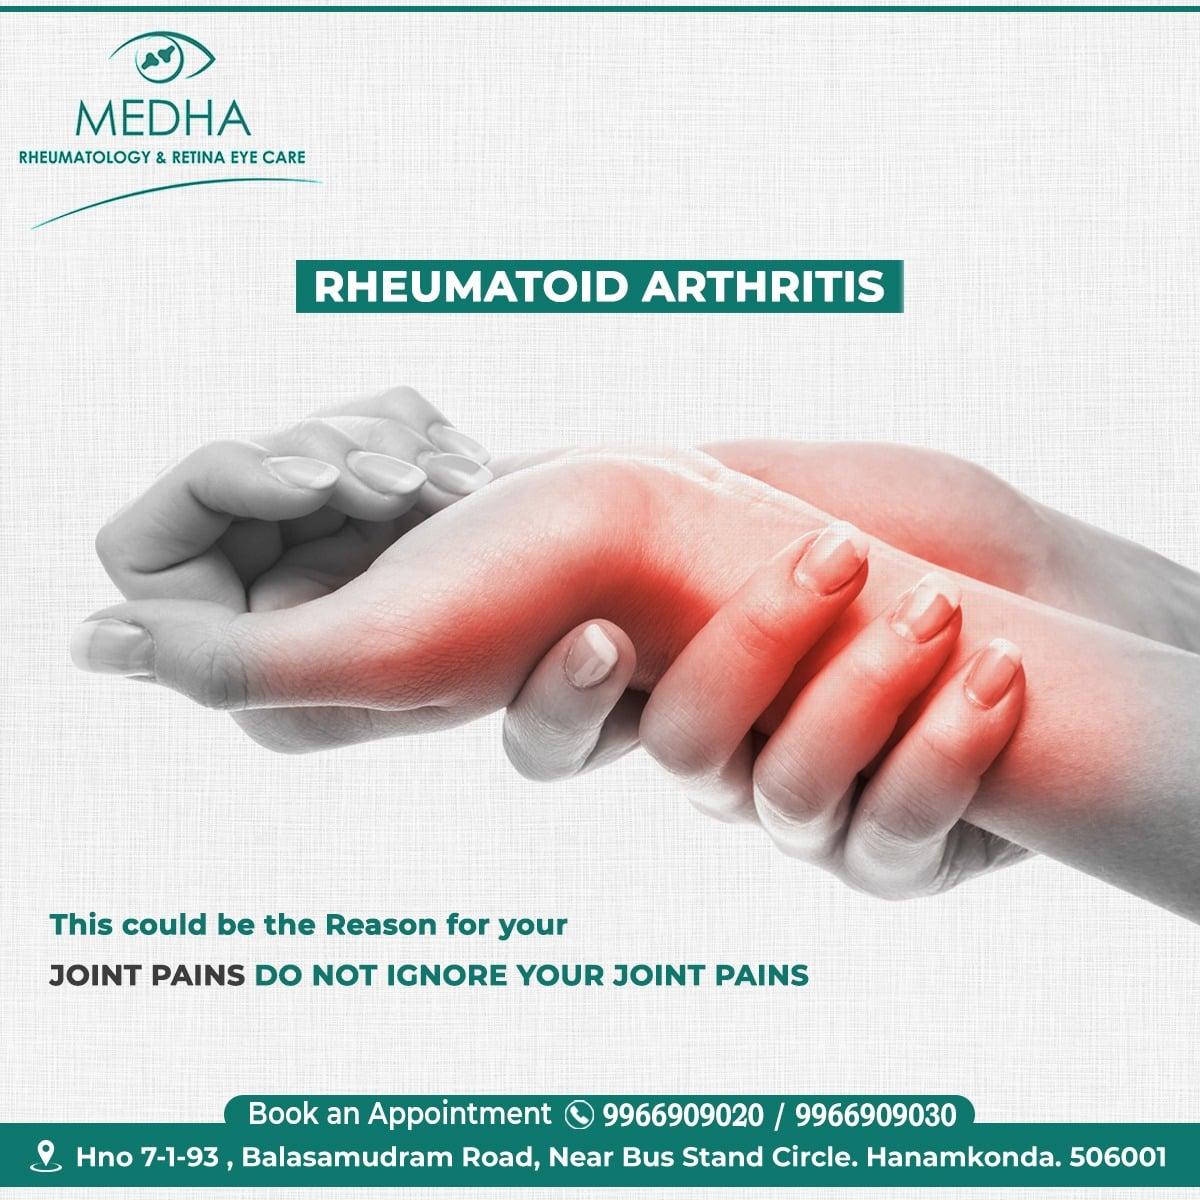 Don’t ignore you’re joint pains! It could lead to Rheumatoid Arthritis.